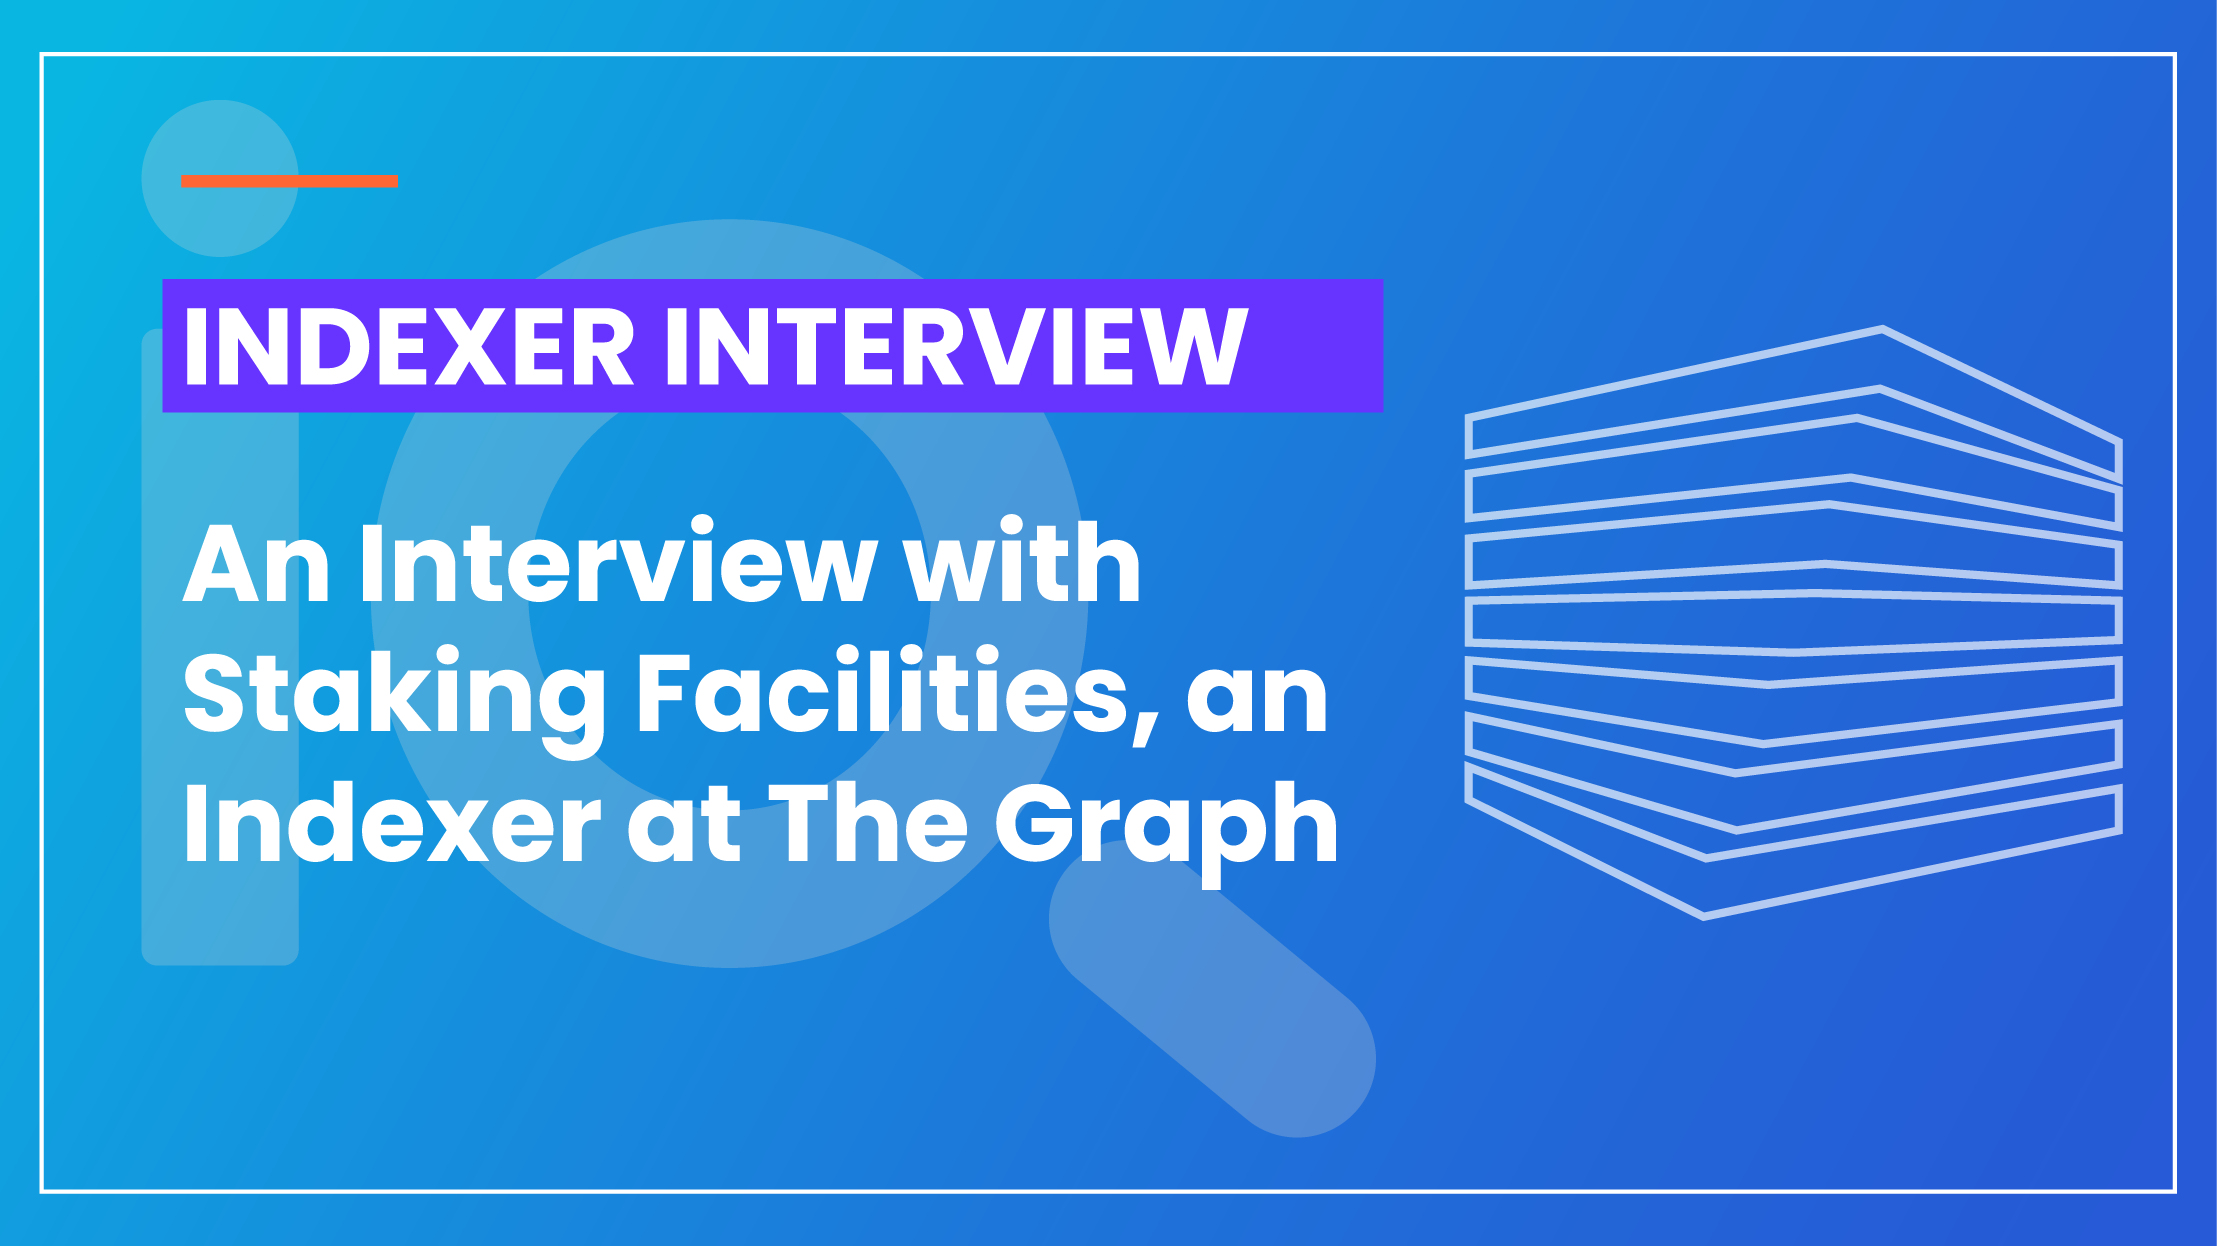 Interview with Staking Facilities, an Indexer at The Graph